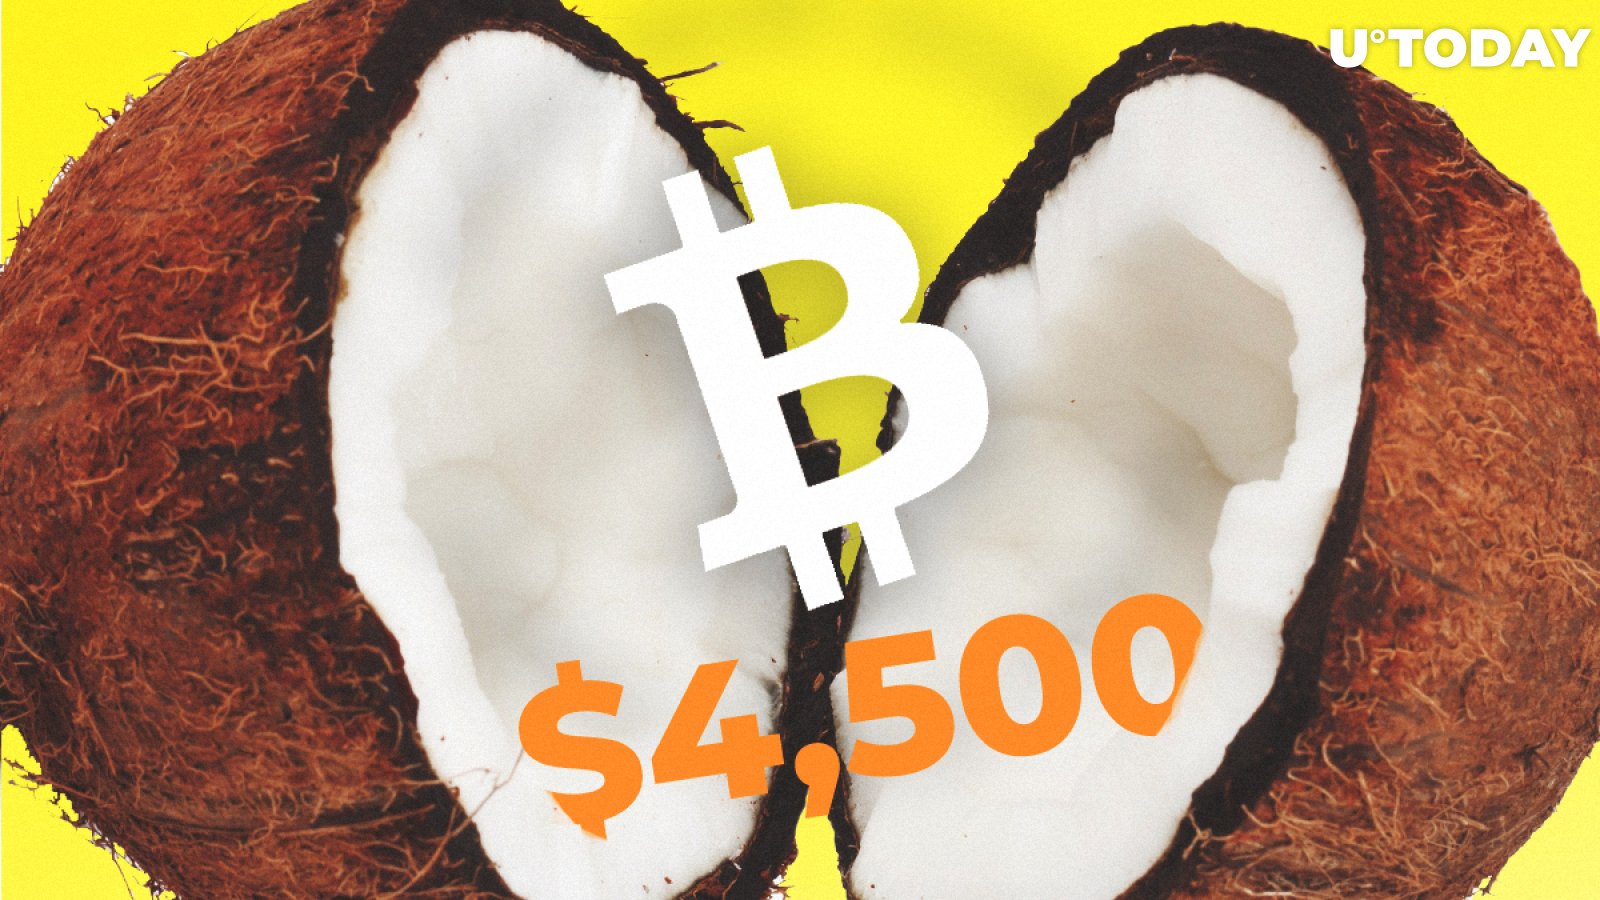 BTC Price Prediction: $6,000 Resistance Was a Hard Nut to Crack. Will BTC Hit $4,500 Bottom Soon?